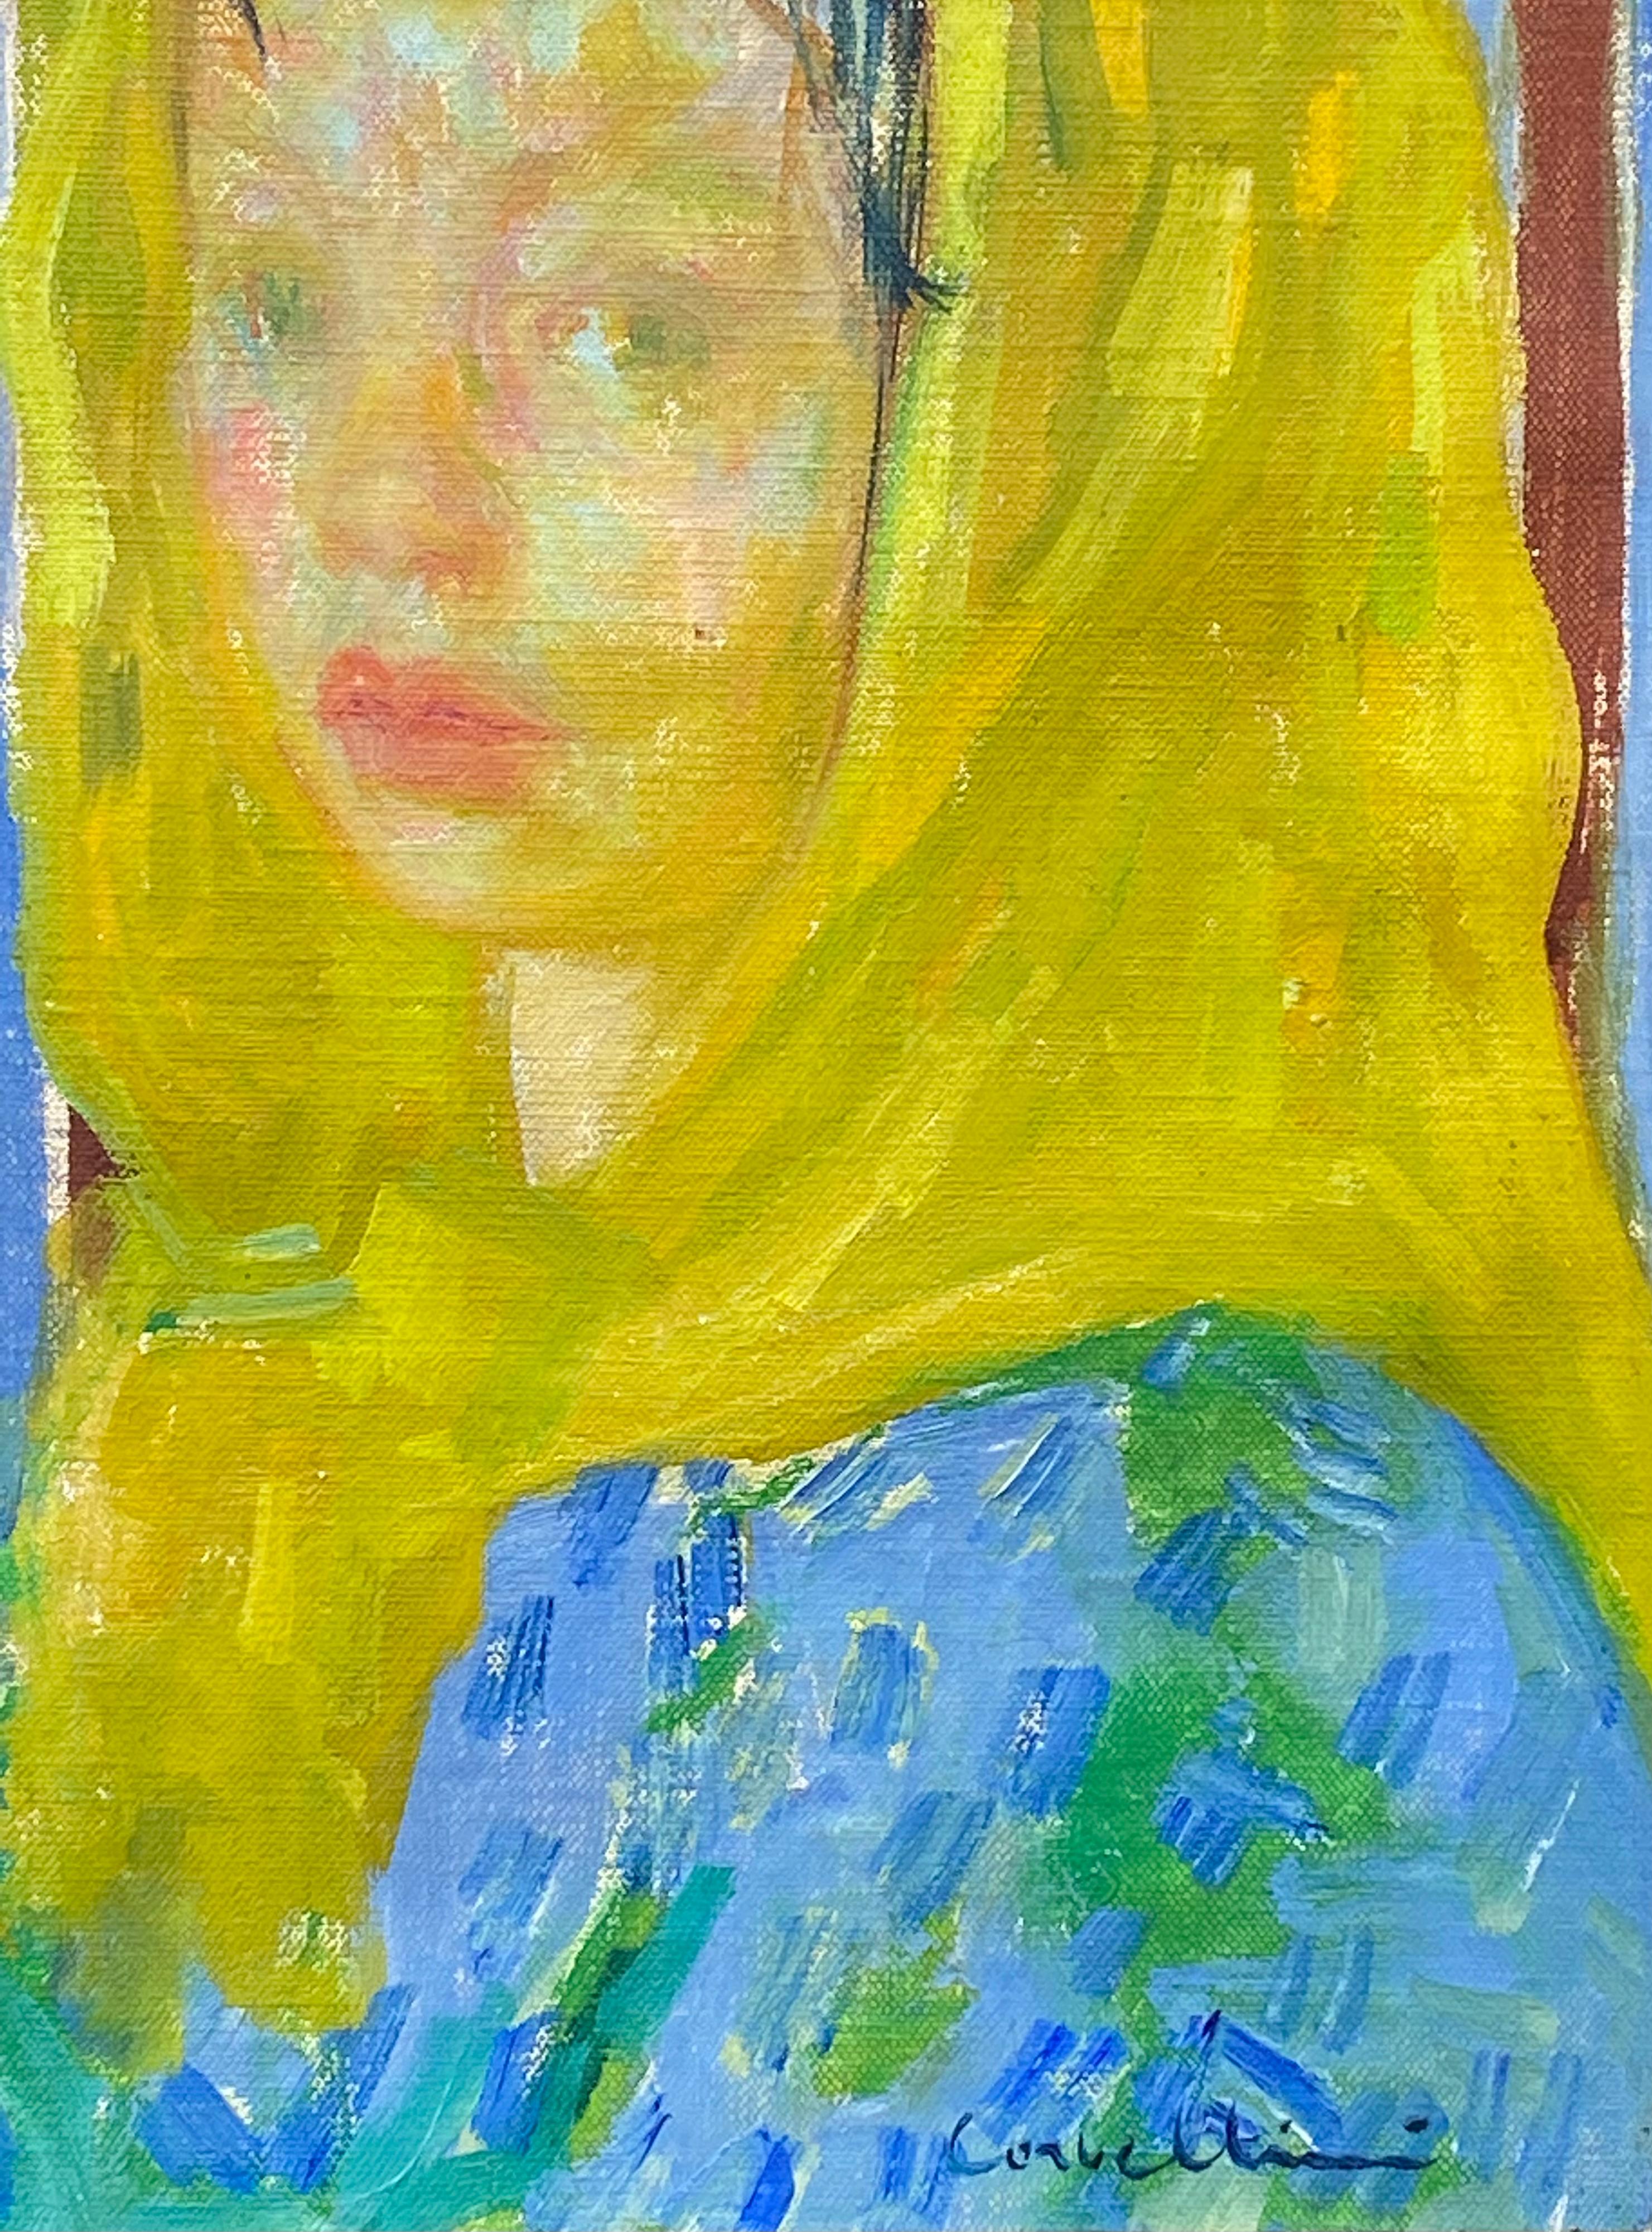 
Oil on canvas painting of a young girl with a yellow scarf by the well known Italian artist, Edgardo Corbelli.  Signed lower right. Titled on canvas verso, “The Proud Girl”.  Circa 1965.  Condition is excellent, no restorations.  Original period